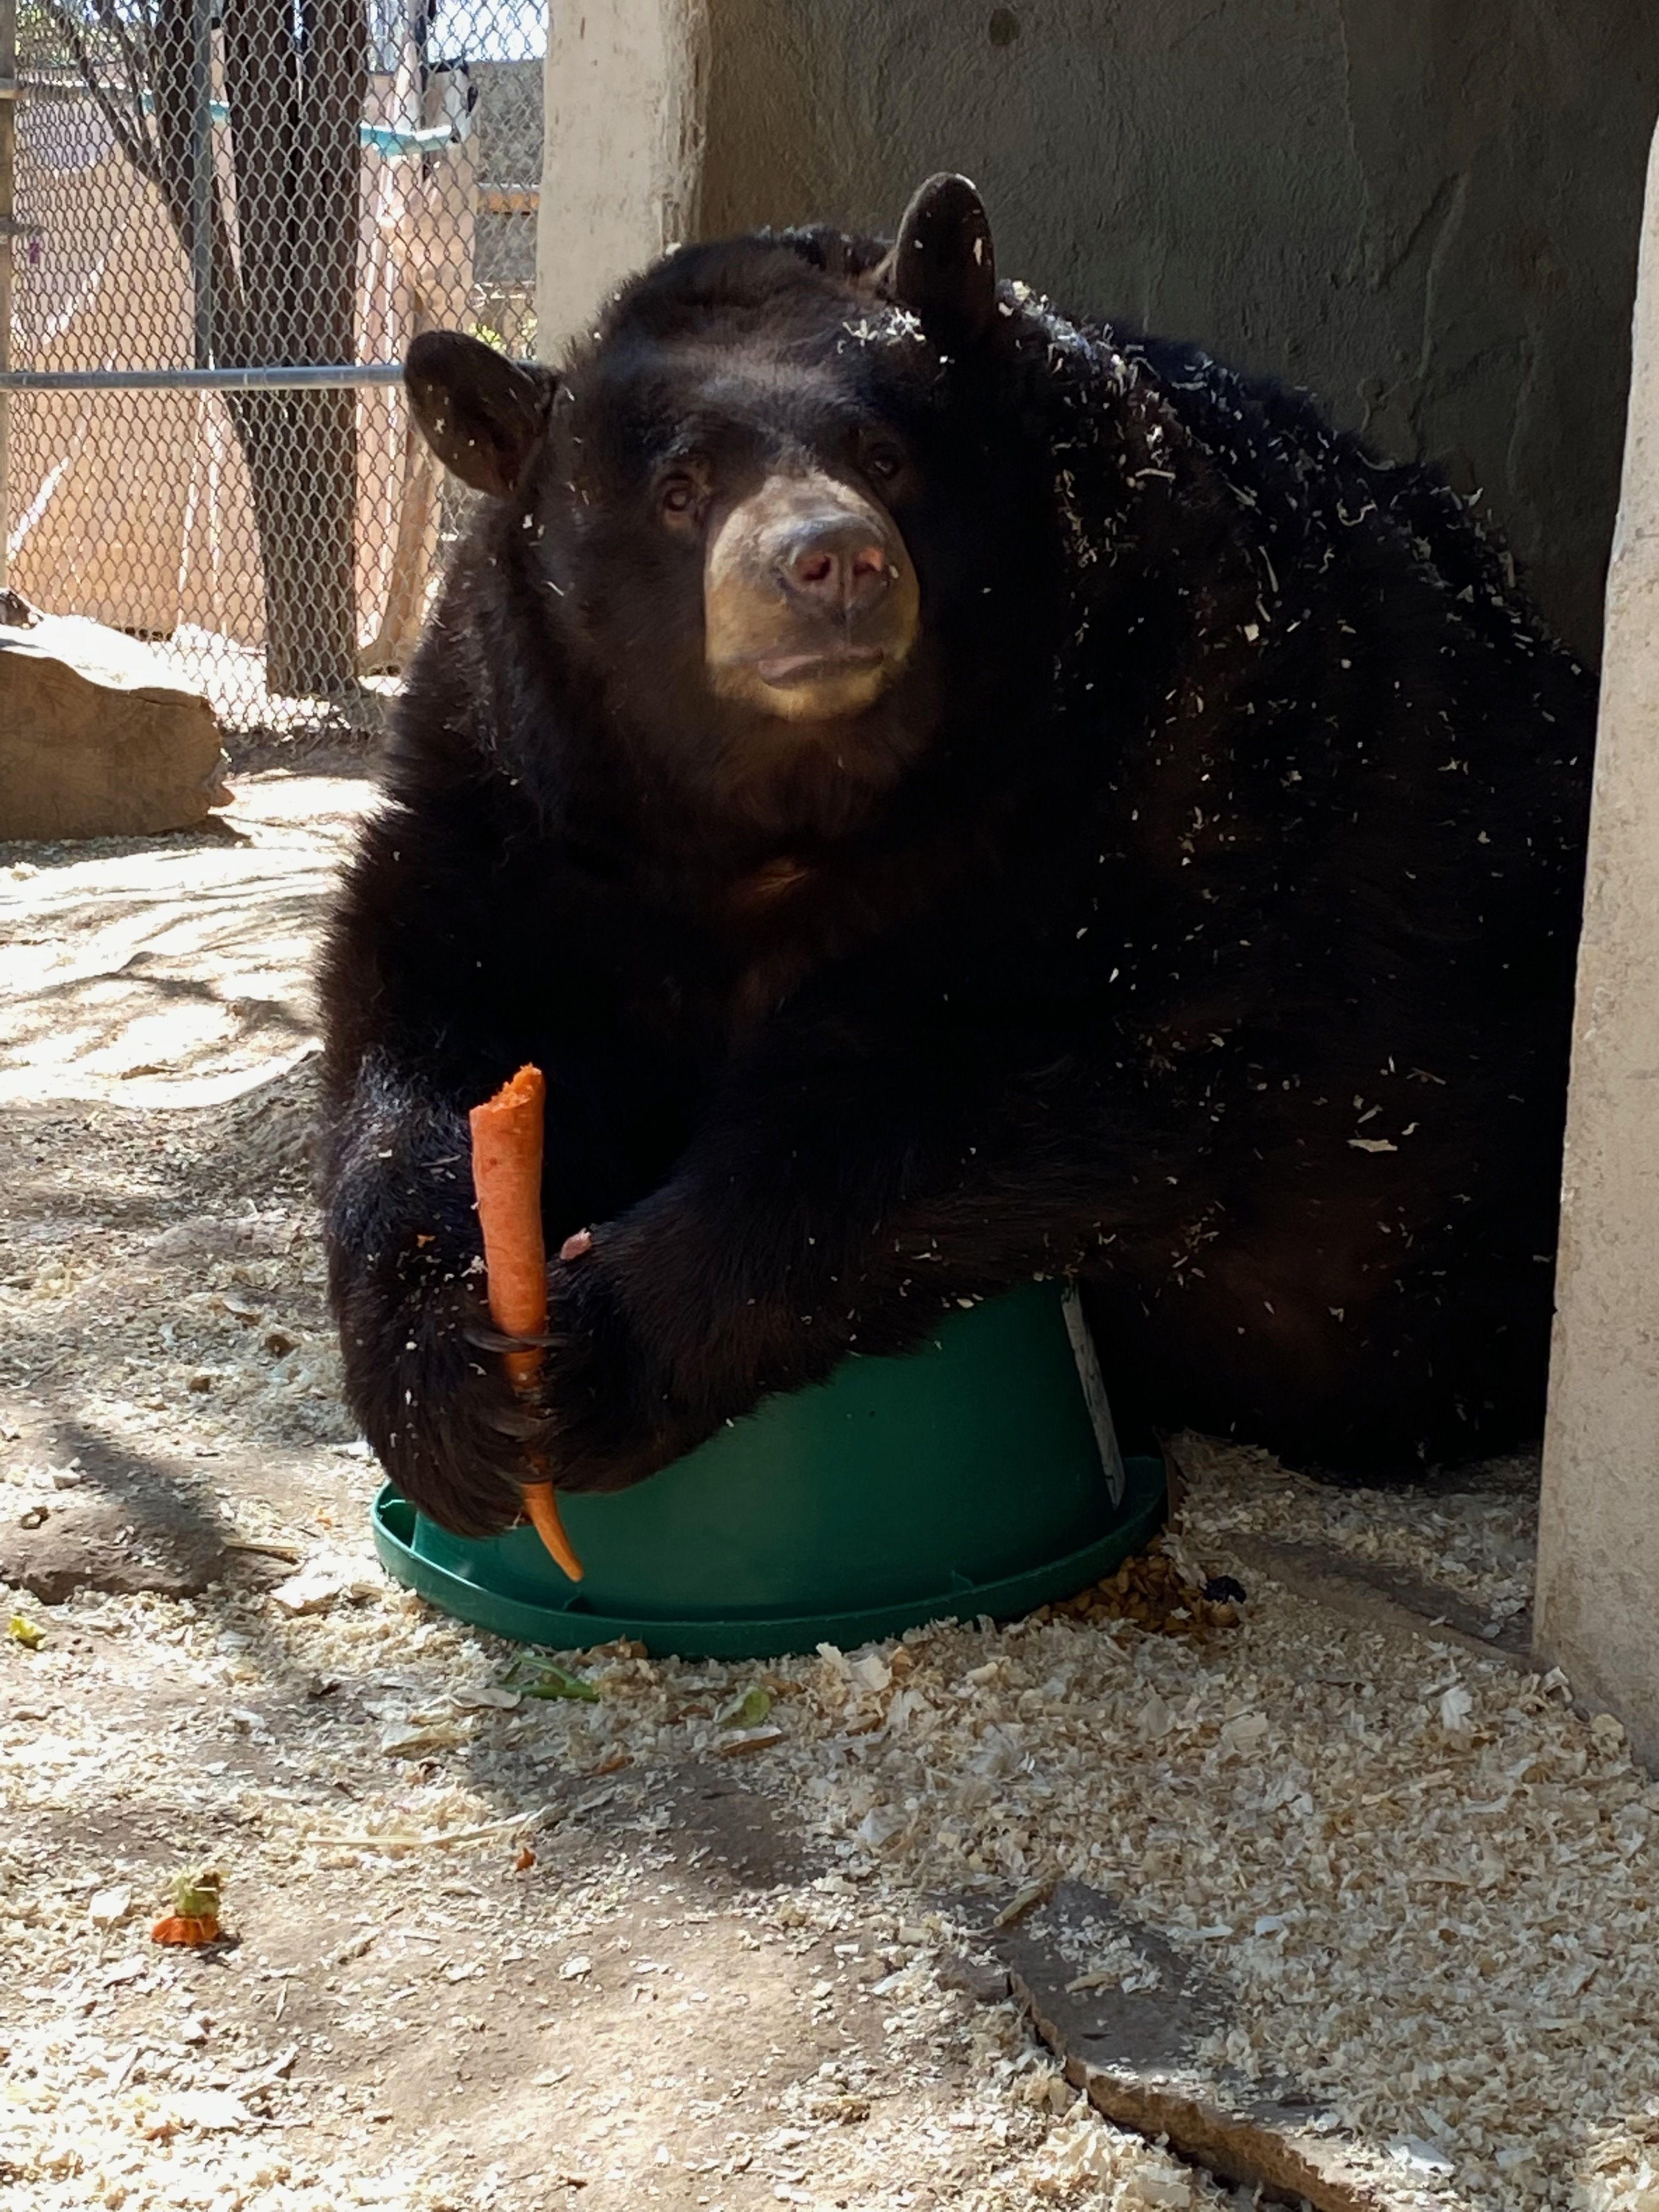 Tahoe the Black Bear sits inside her den, leaning onto her big green bear-sized food bowl. She daintily holds a ripe, orange carrot in her paws as if it were a popsicle or a bouquet of flowers. She looks straight into the camera with delight at her snack.